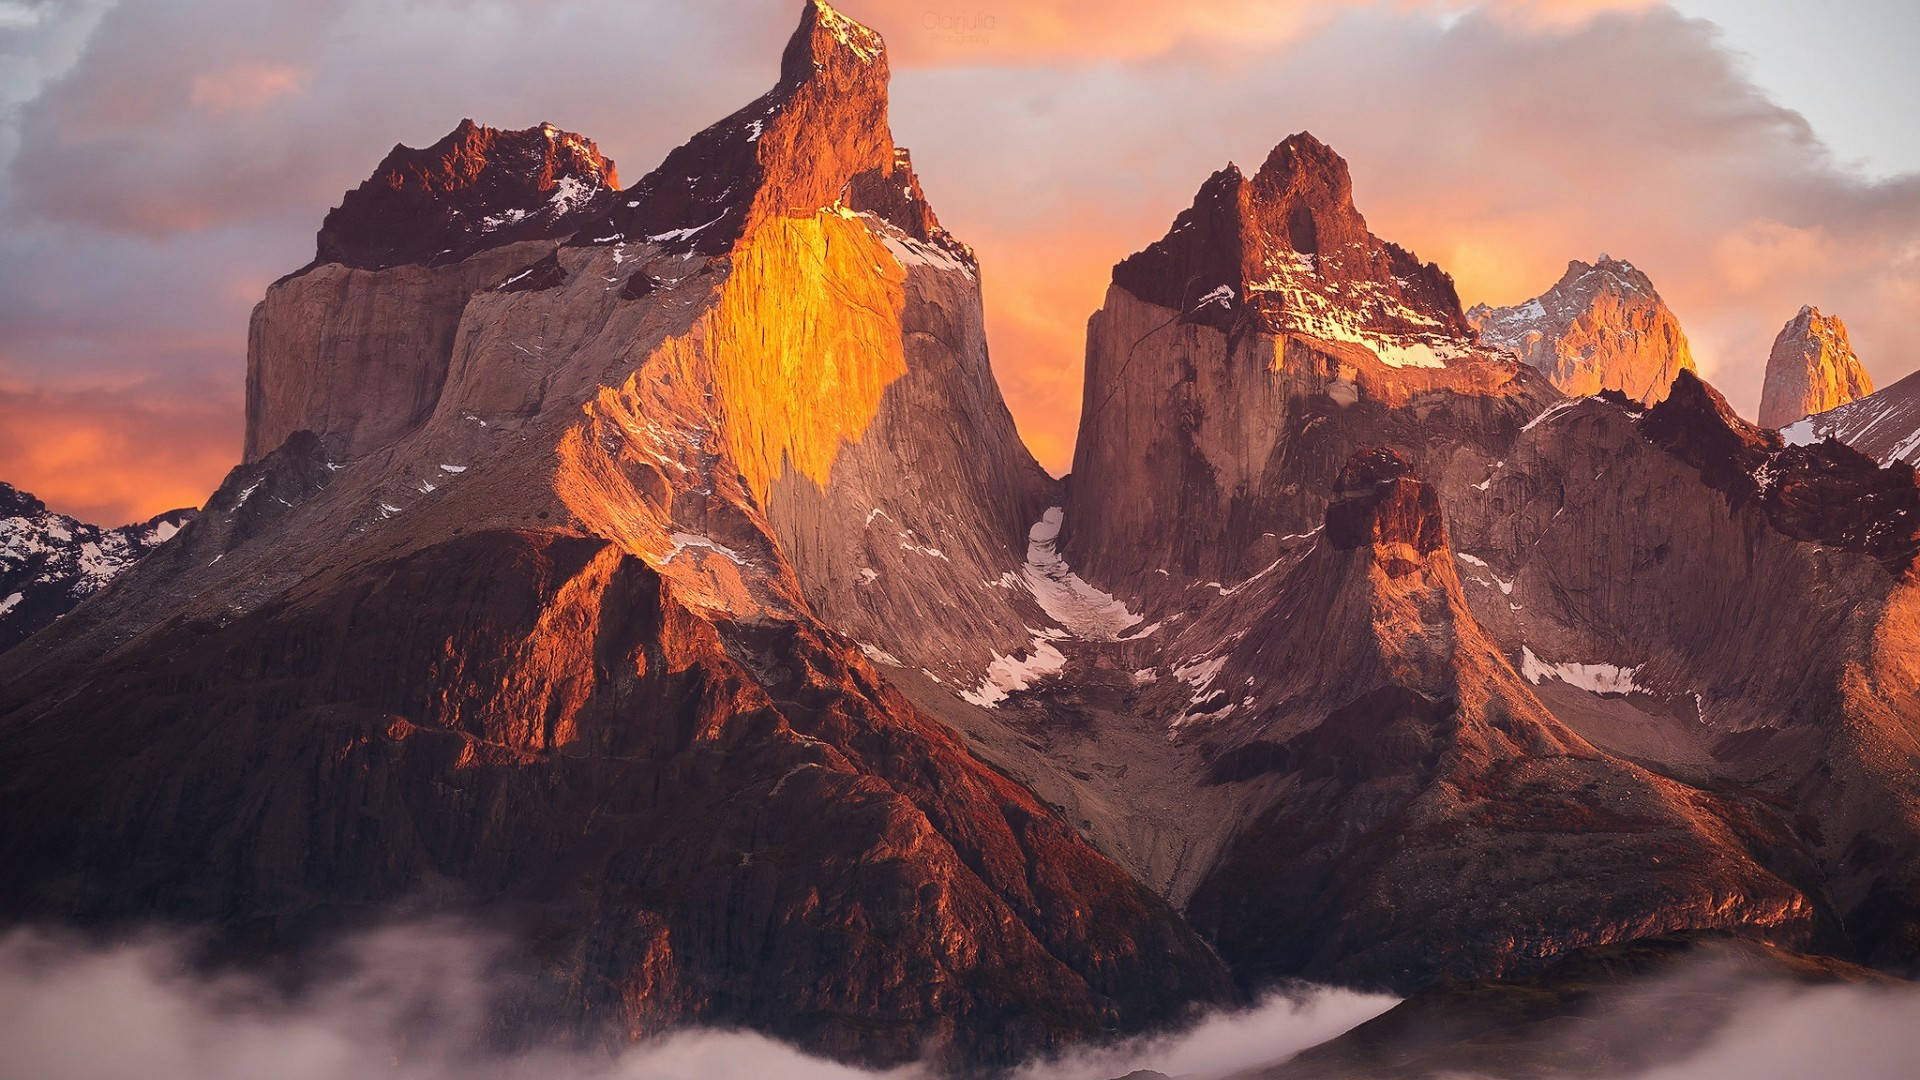 Peru Andes Mountain In Sunset Wallpaper